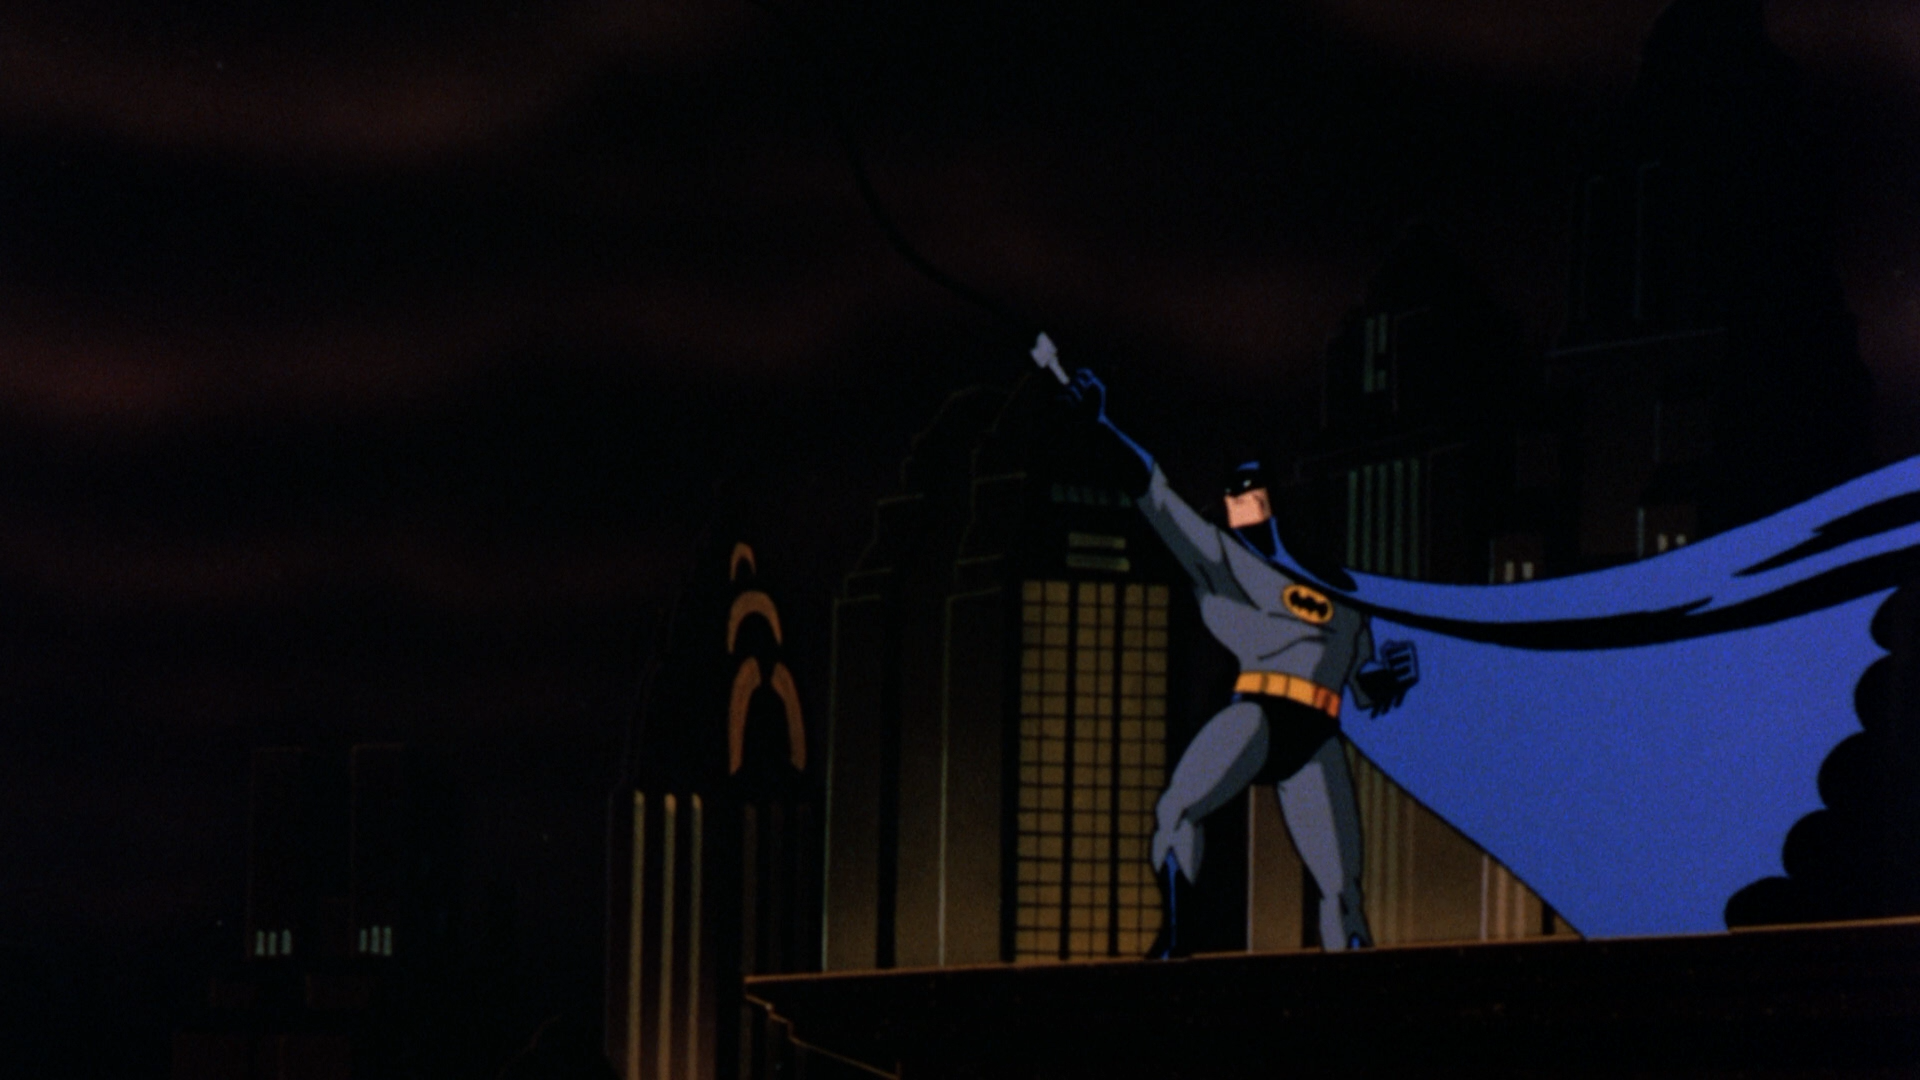 Batman: Mask of the Phantasm BD + Screen Caps's Guide to the Movies